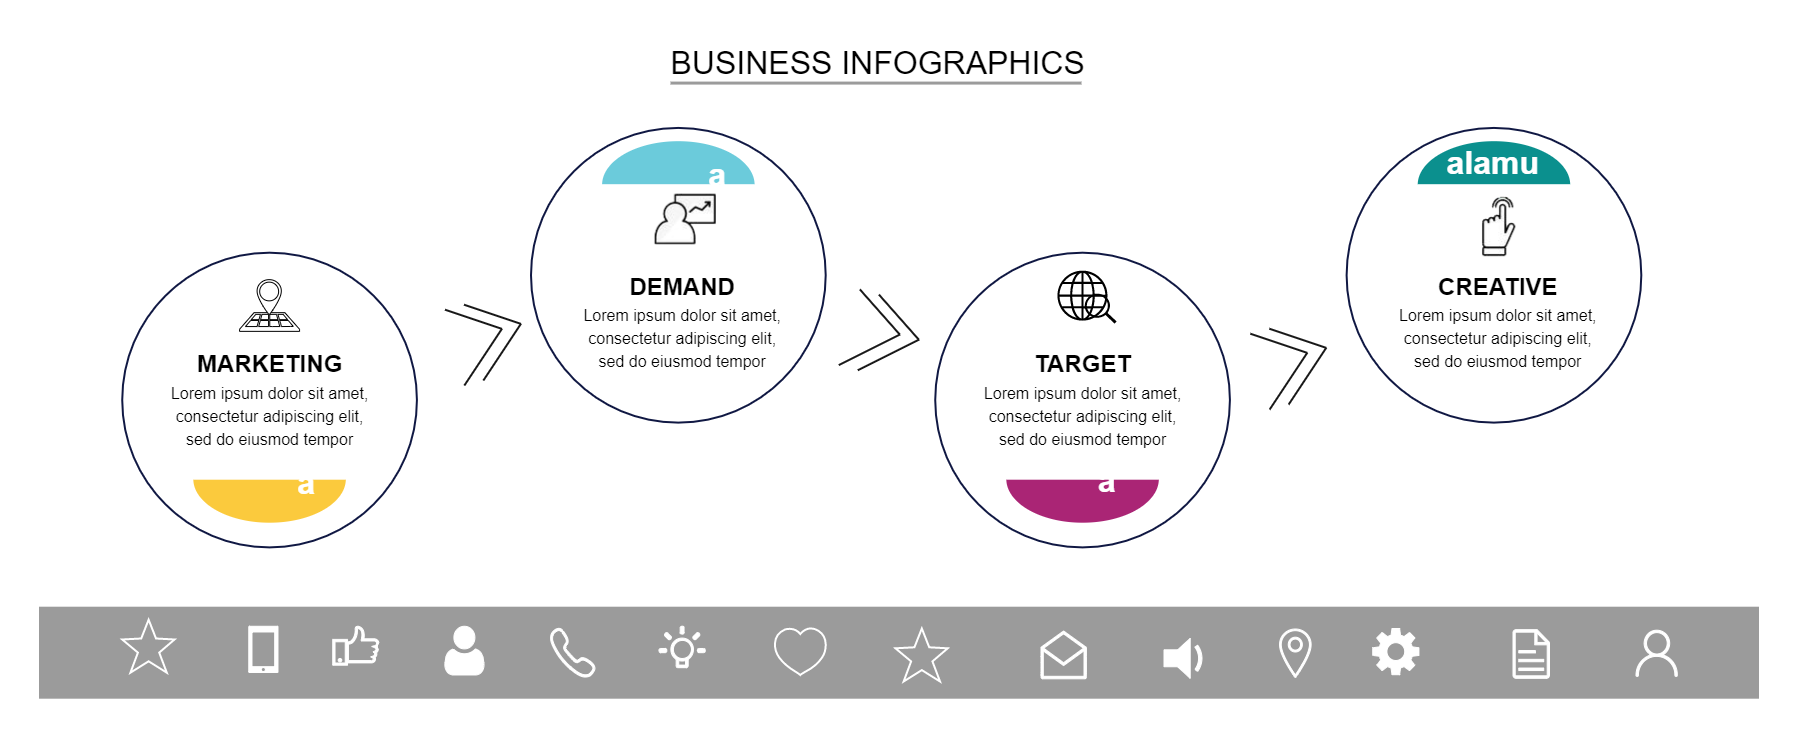 Target Diagram Online Templates For Business